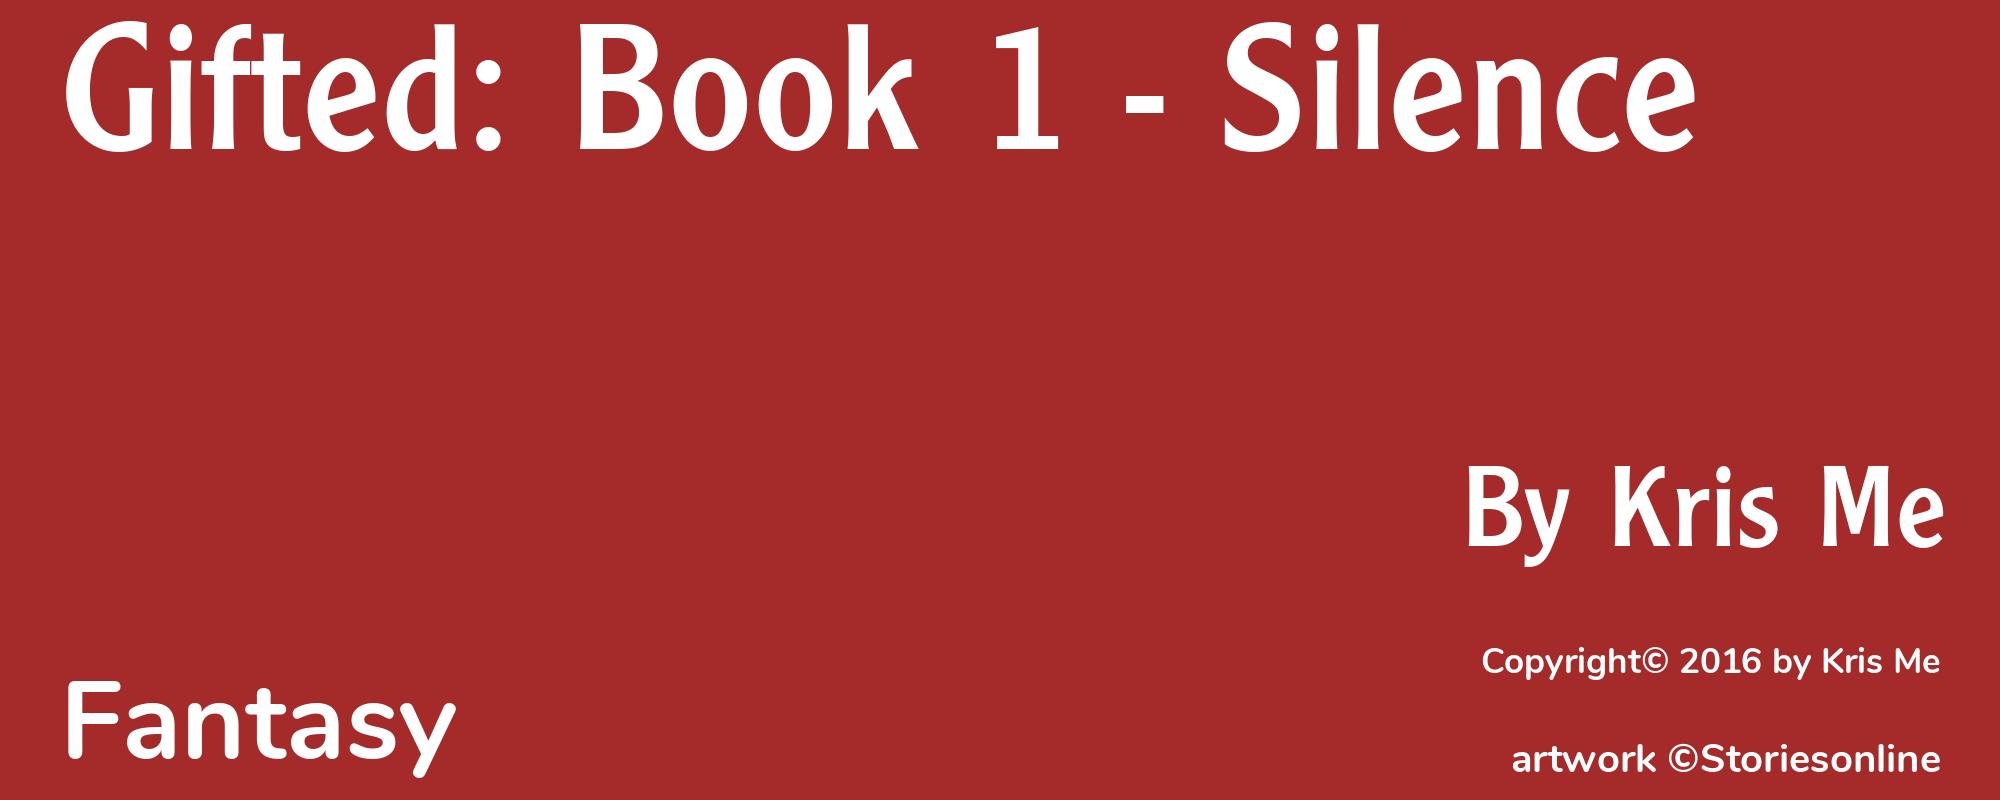 Gifted: Book 1 - Silence - Cover